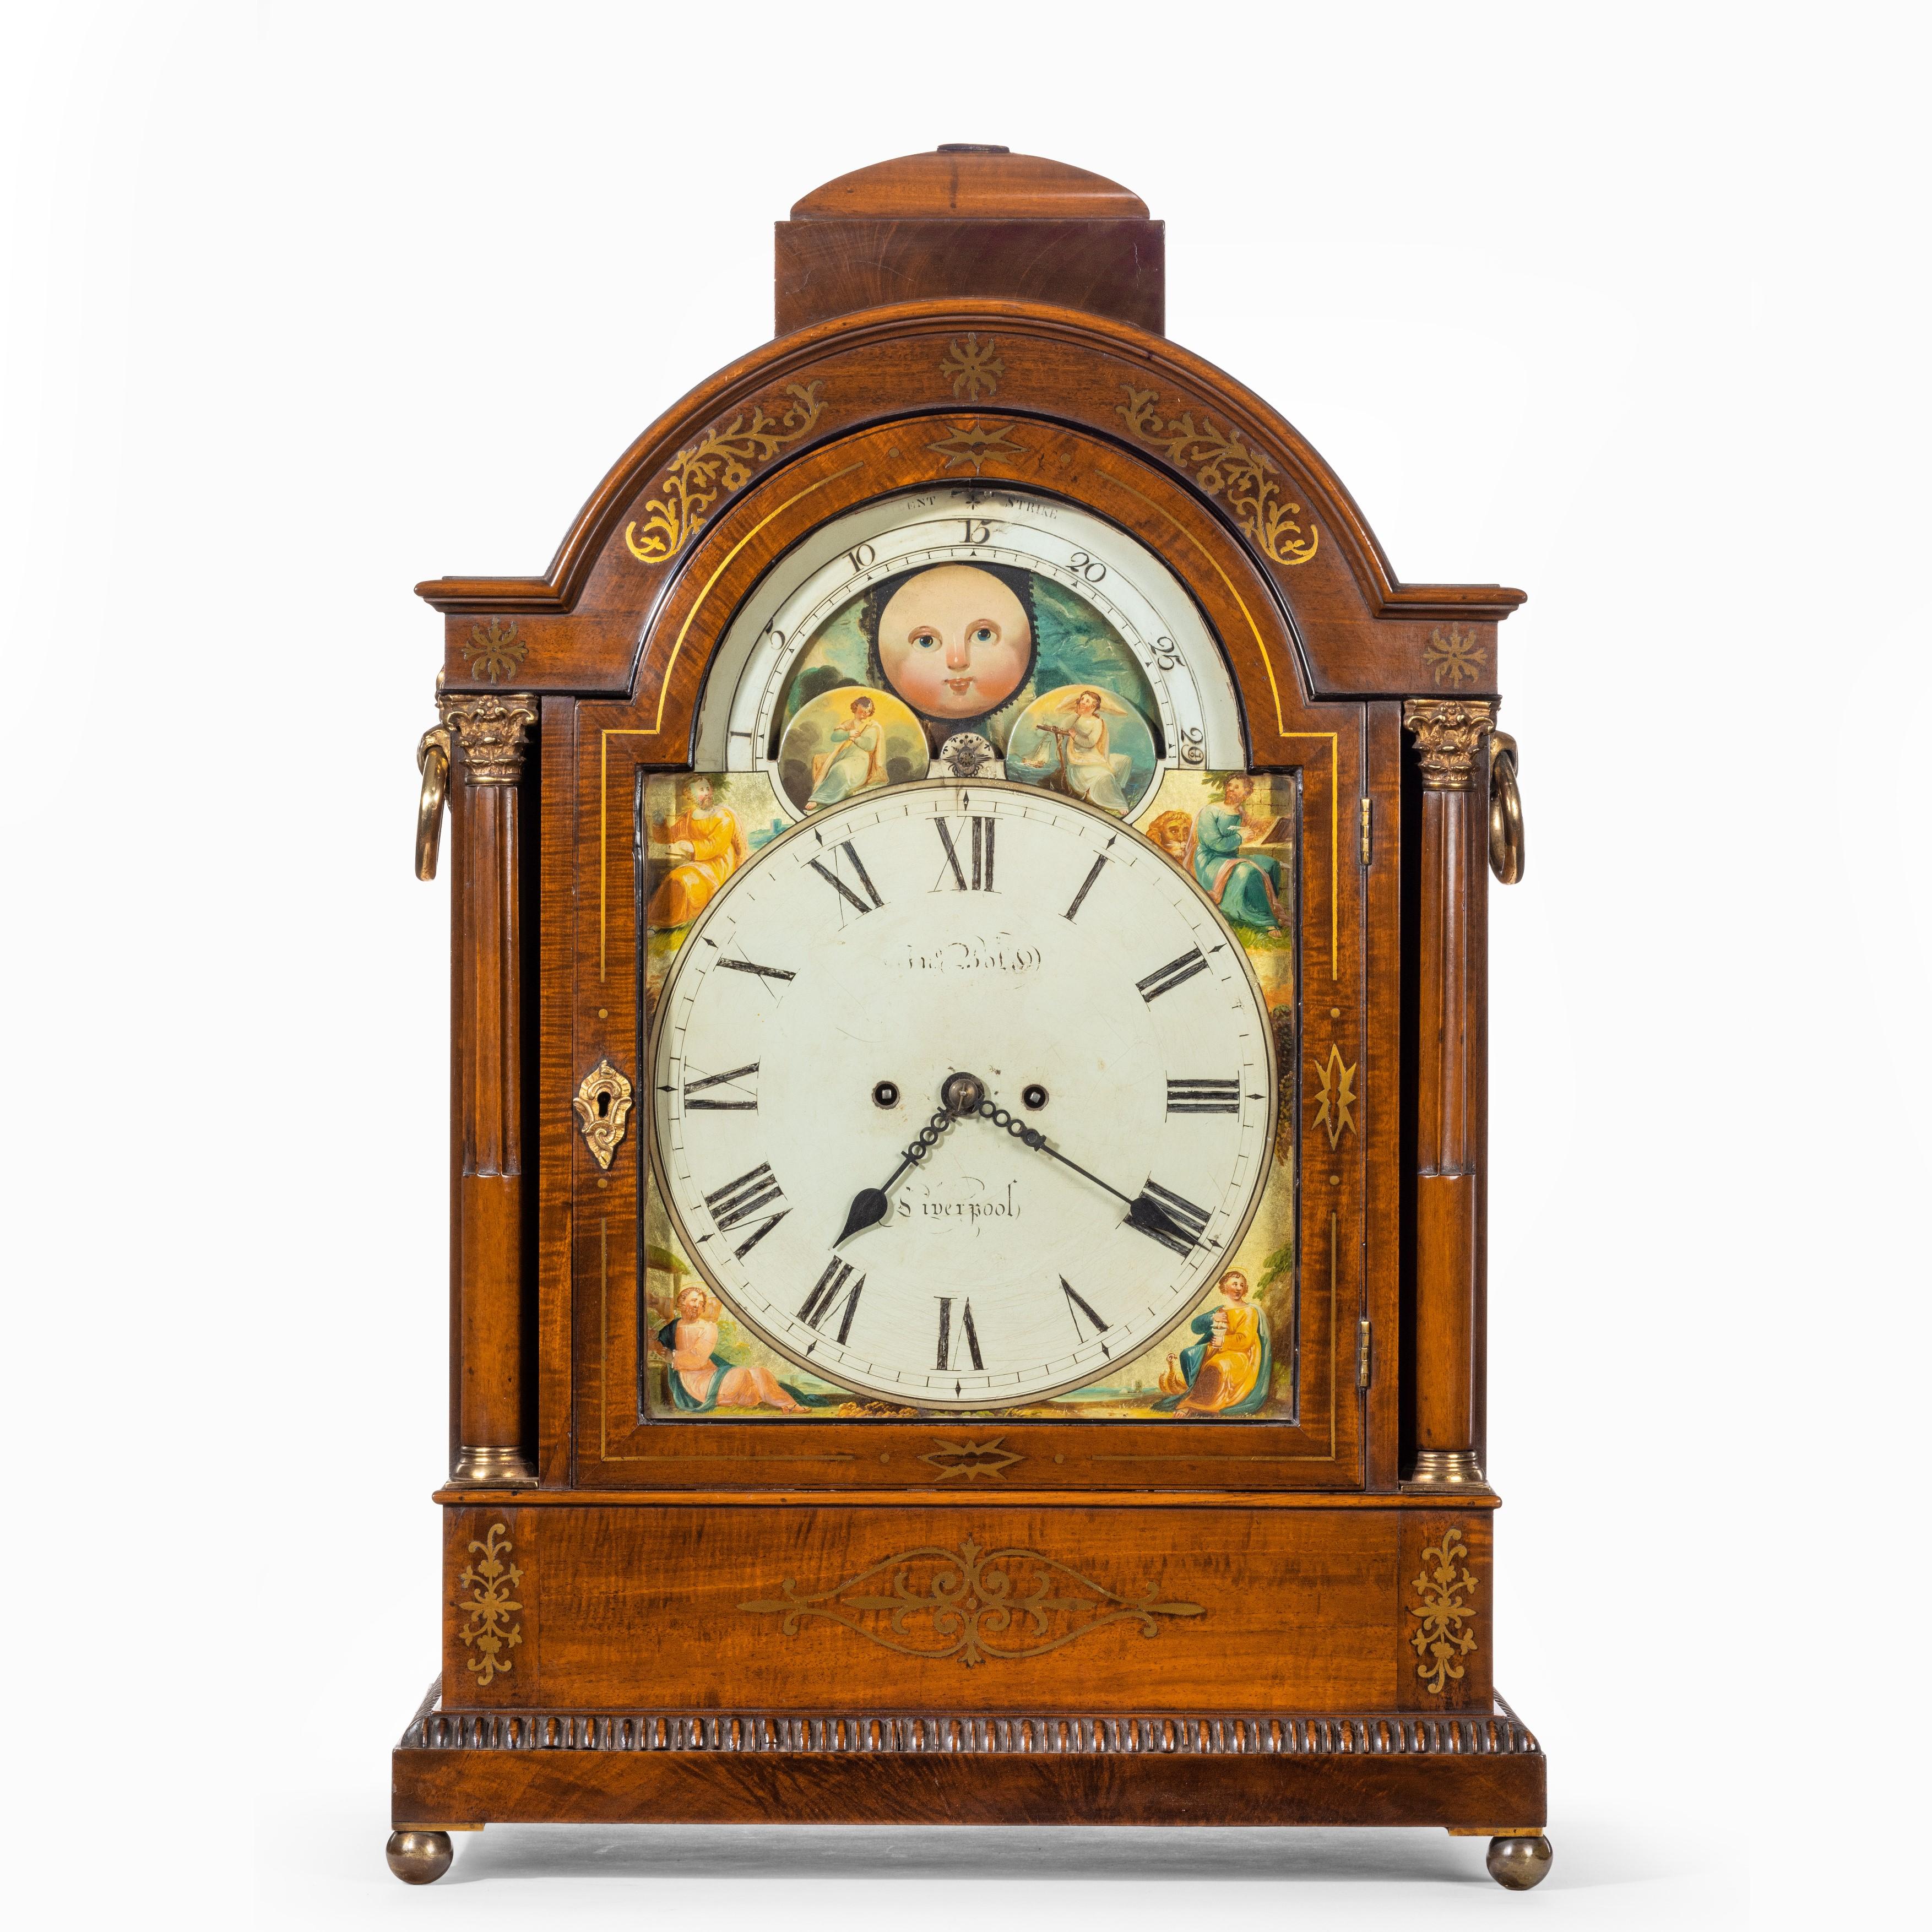 A large late Regency mahogany brass inlaid bracket clock by John Foster, the painted arched dial signed John Foster, Liverpool, with strike/silent, moon phase, and date, the two train fusee movement striking on a bell, set in a domed case with